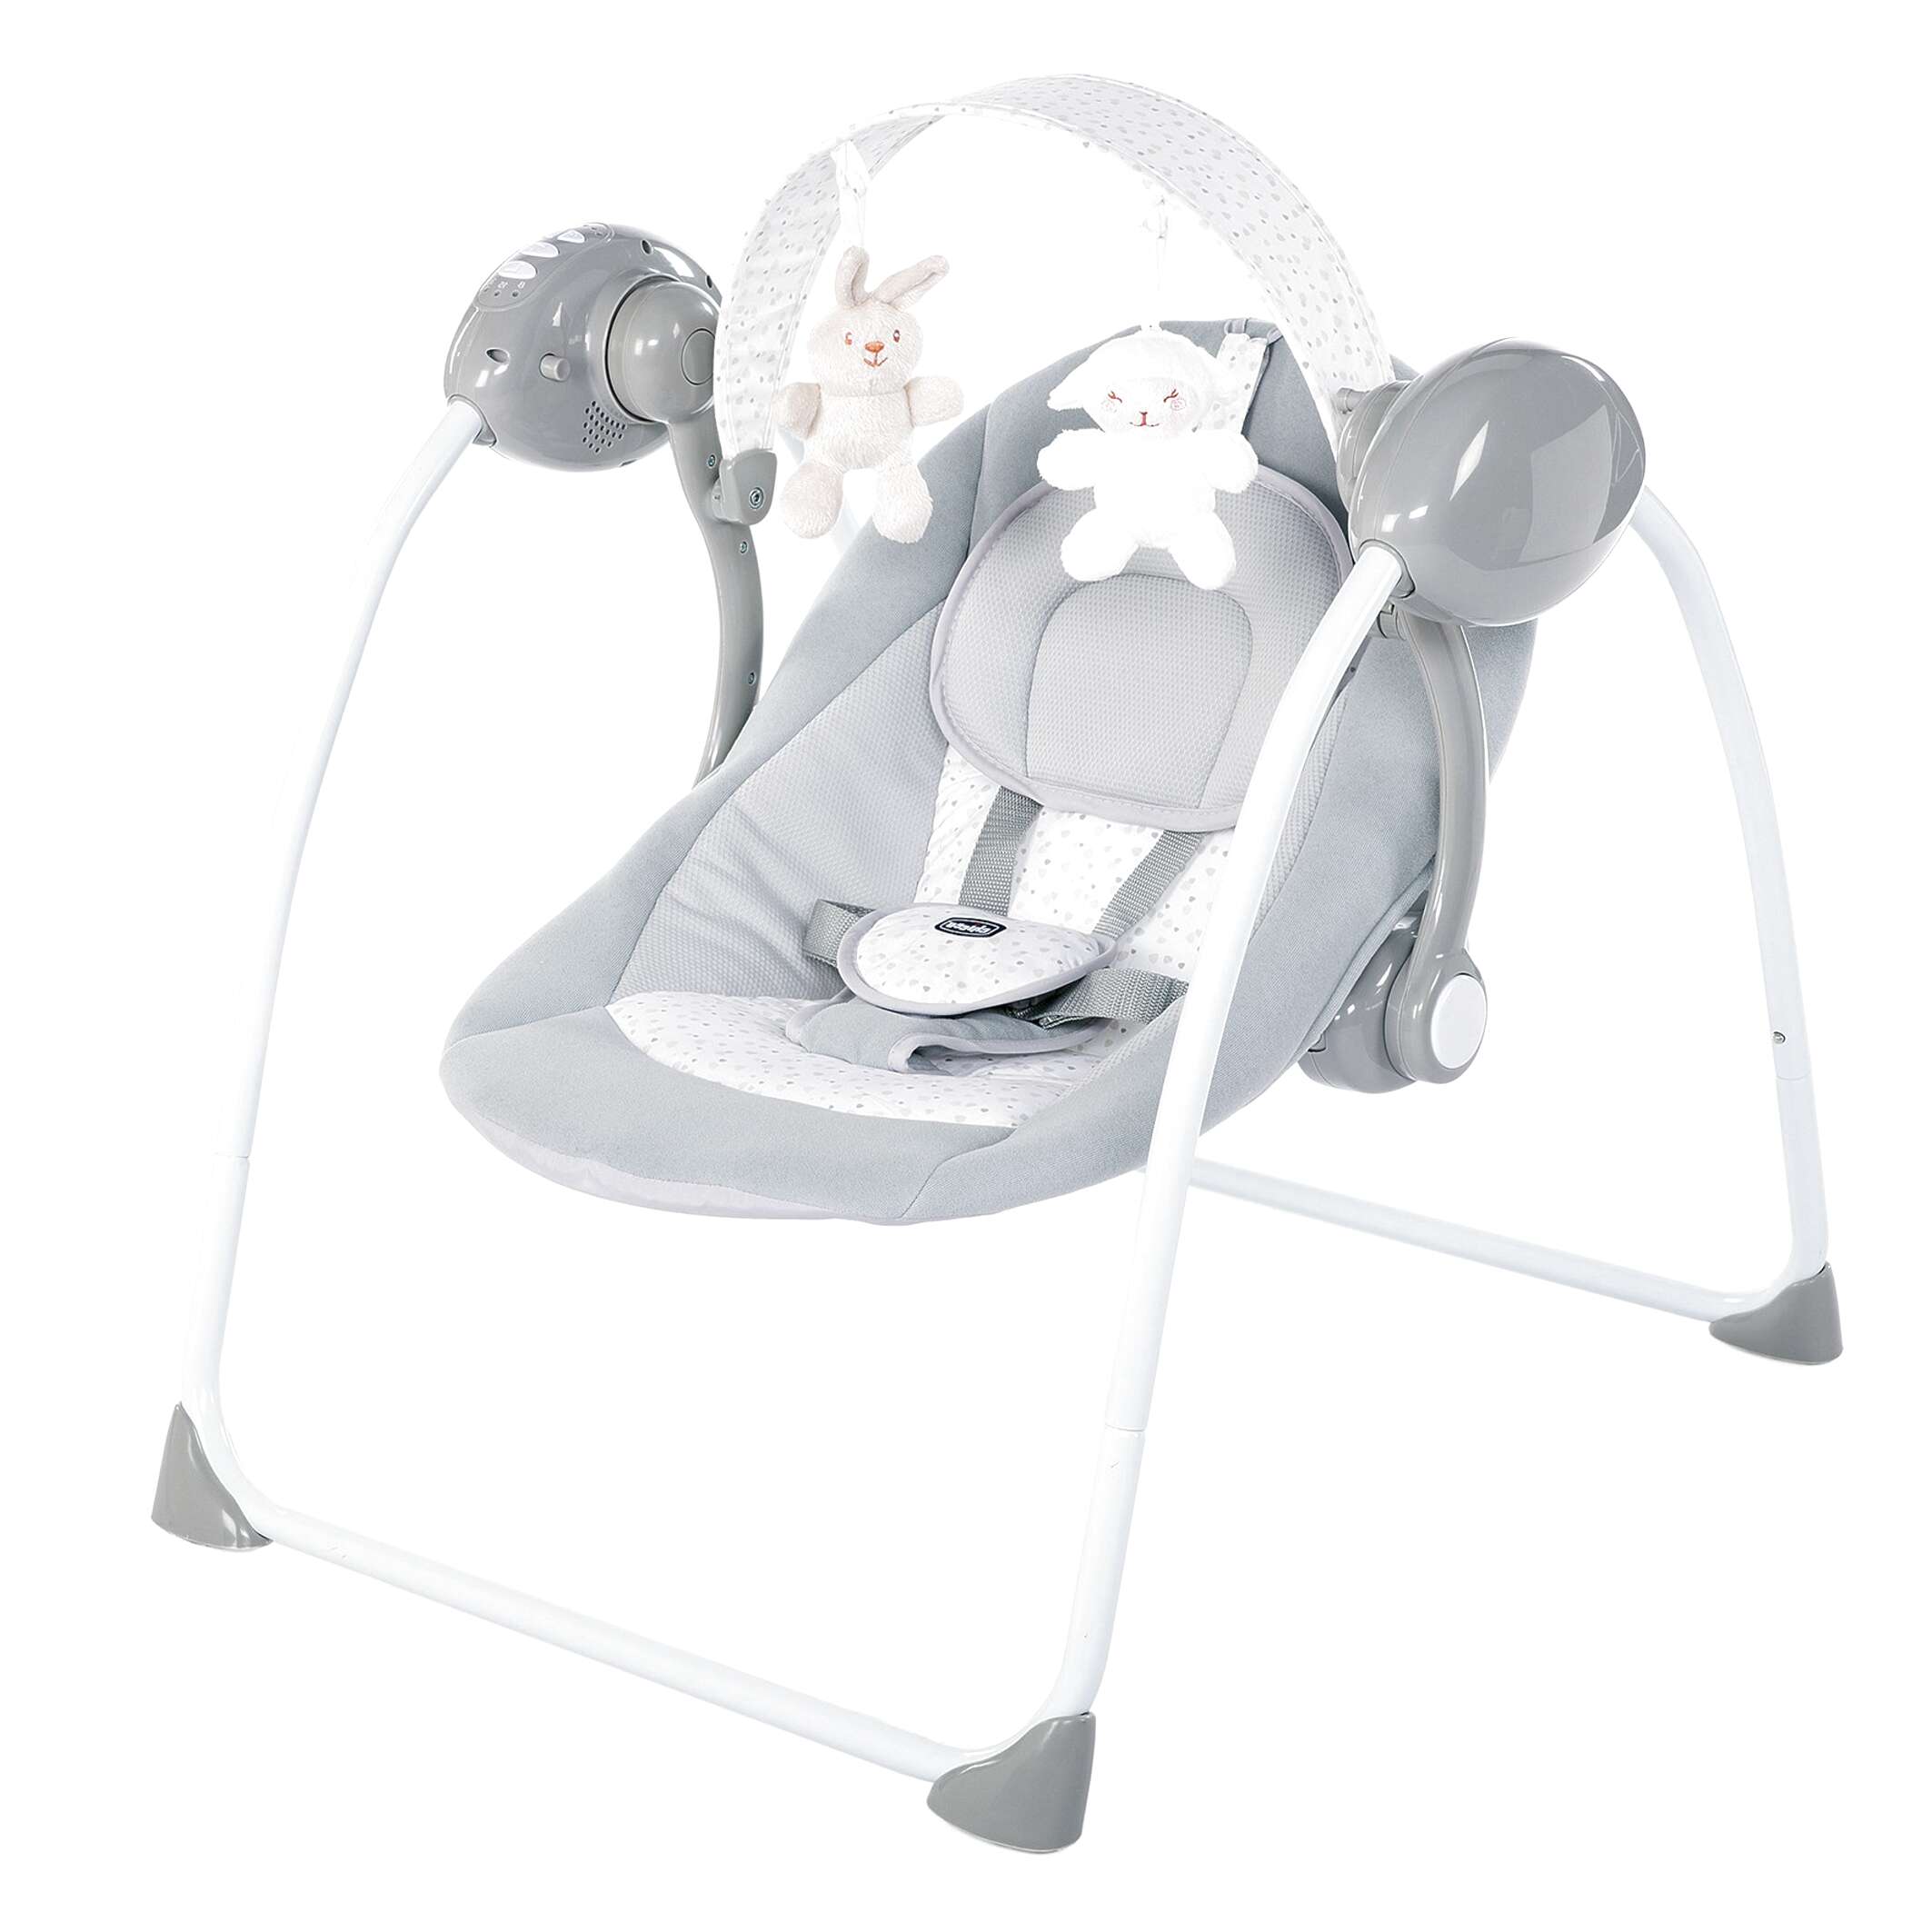 Baby Relax Chair for sale in UK | 58 used Baby Relax Chairs